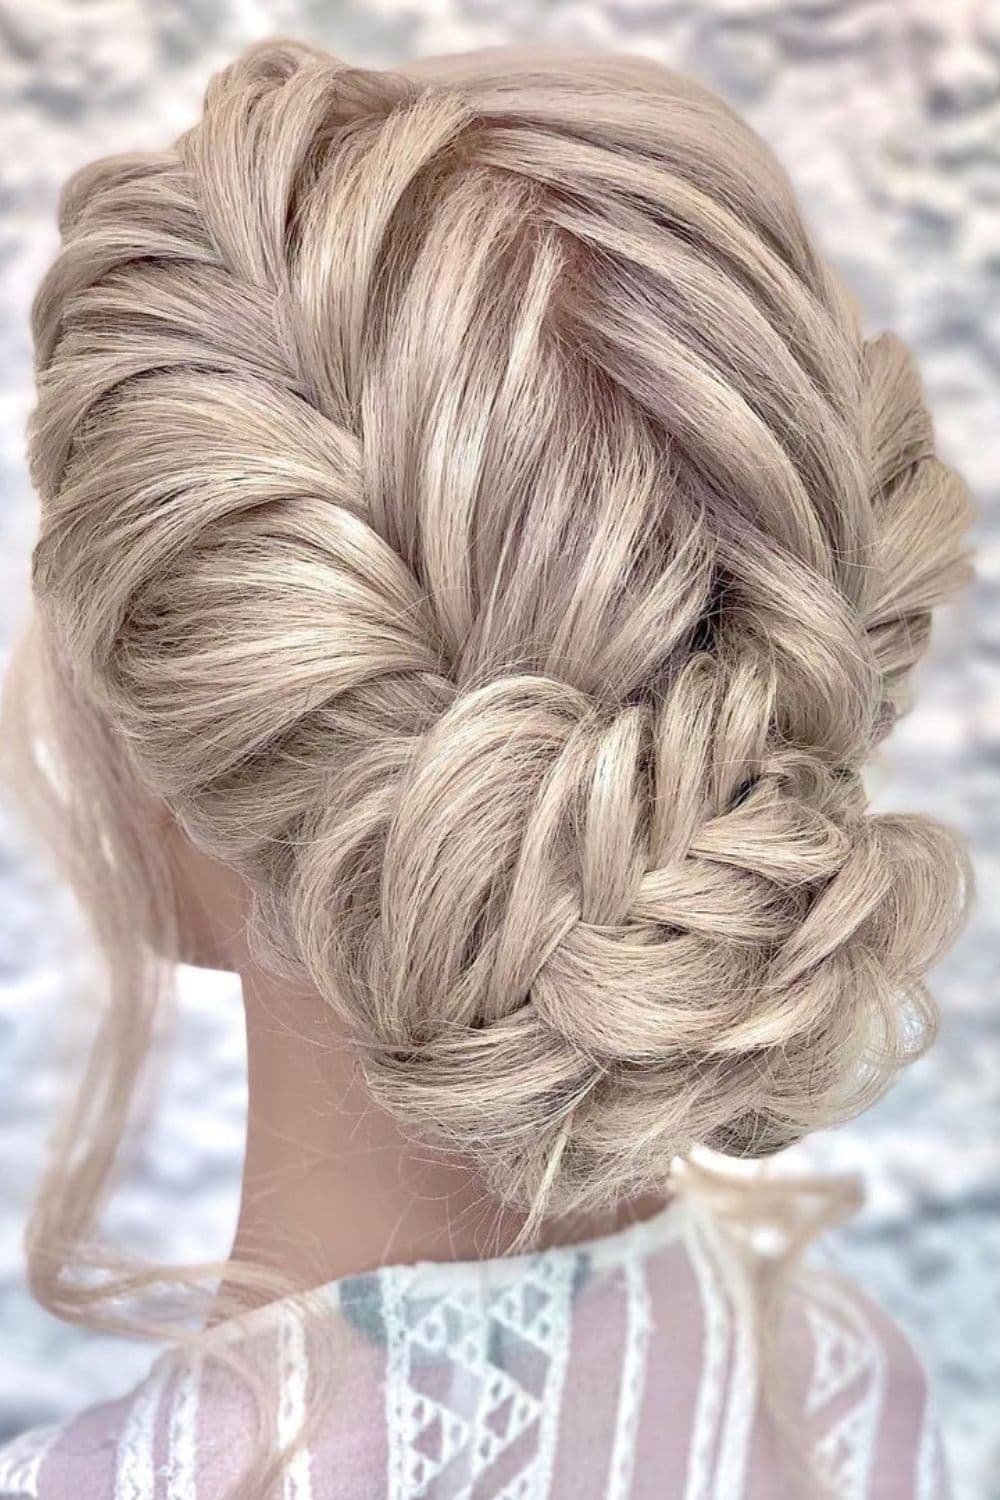 A mannequin with a blonde crimped braided updo.